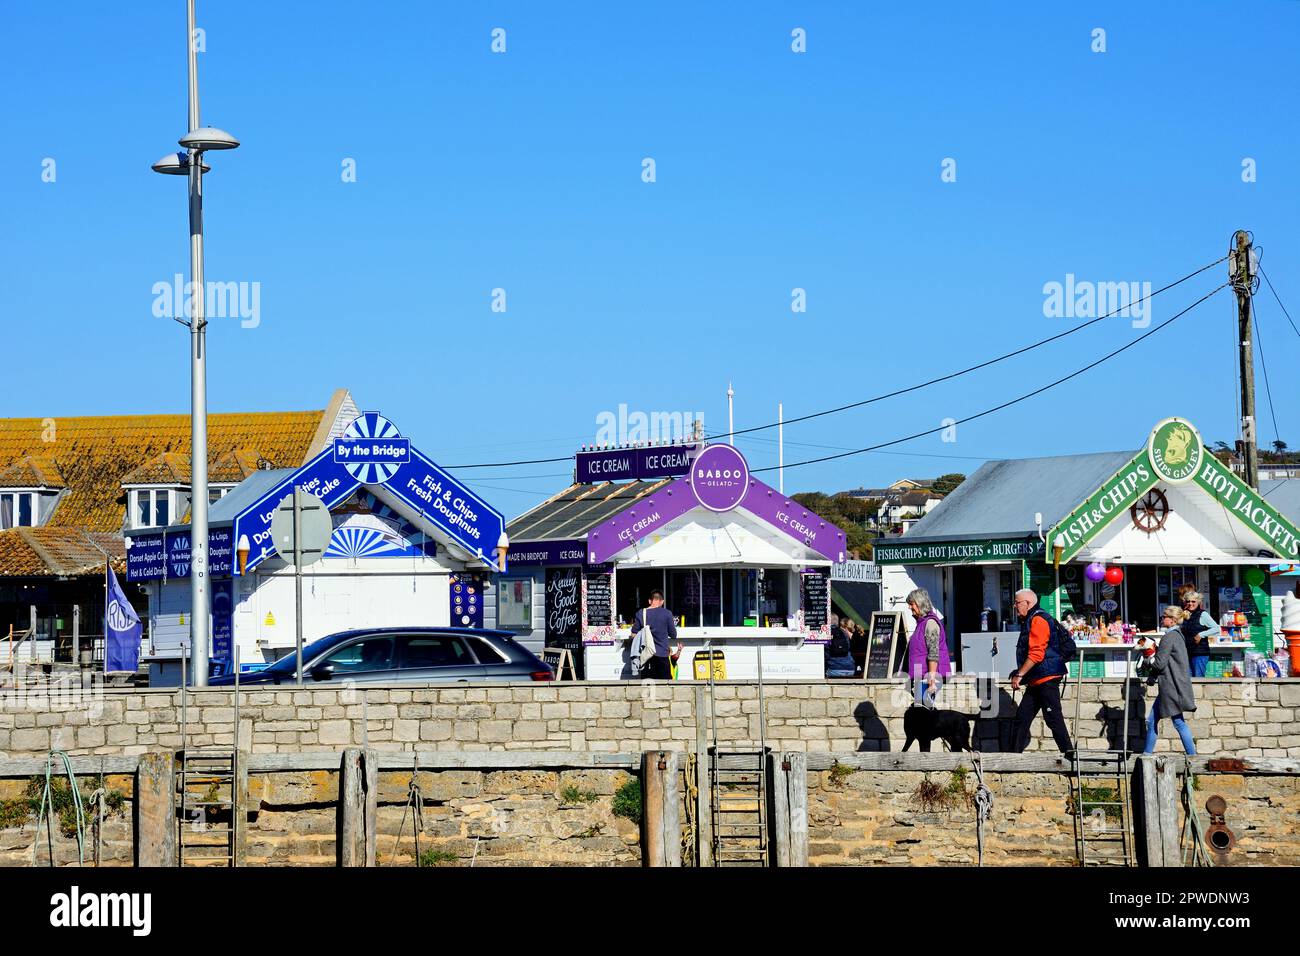 Tourists looking at snack kiosks alongside the harbour in the town, West Bay, Dorset, UK, Europe. Stock Photo